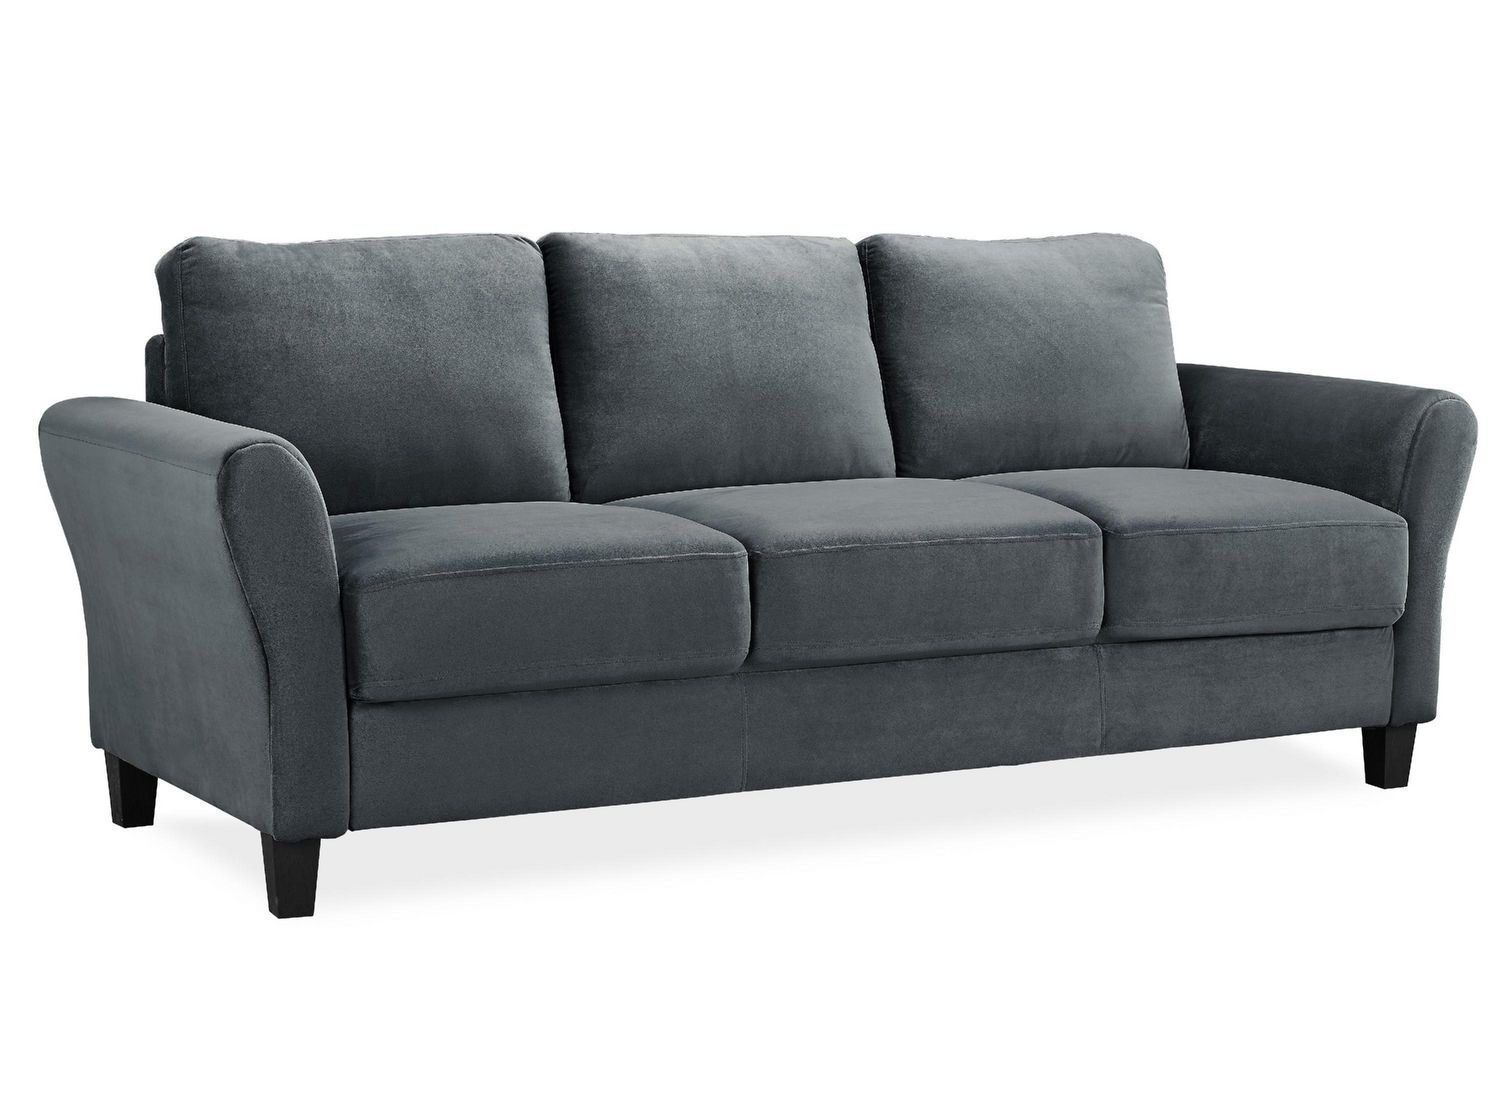 lifestyle solutions orlando twin sofa bed